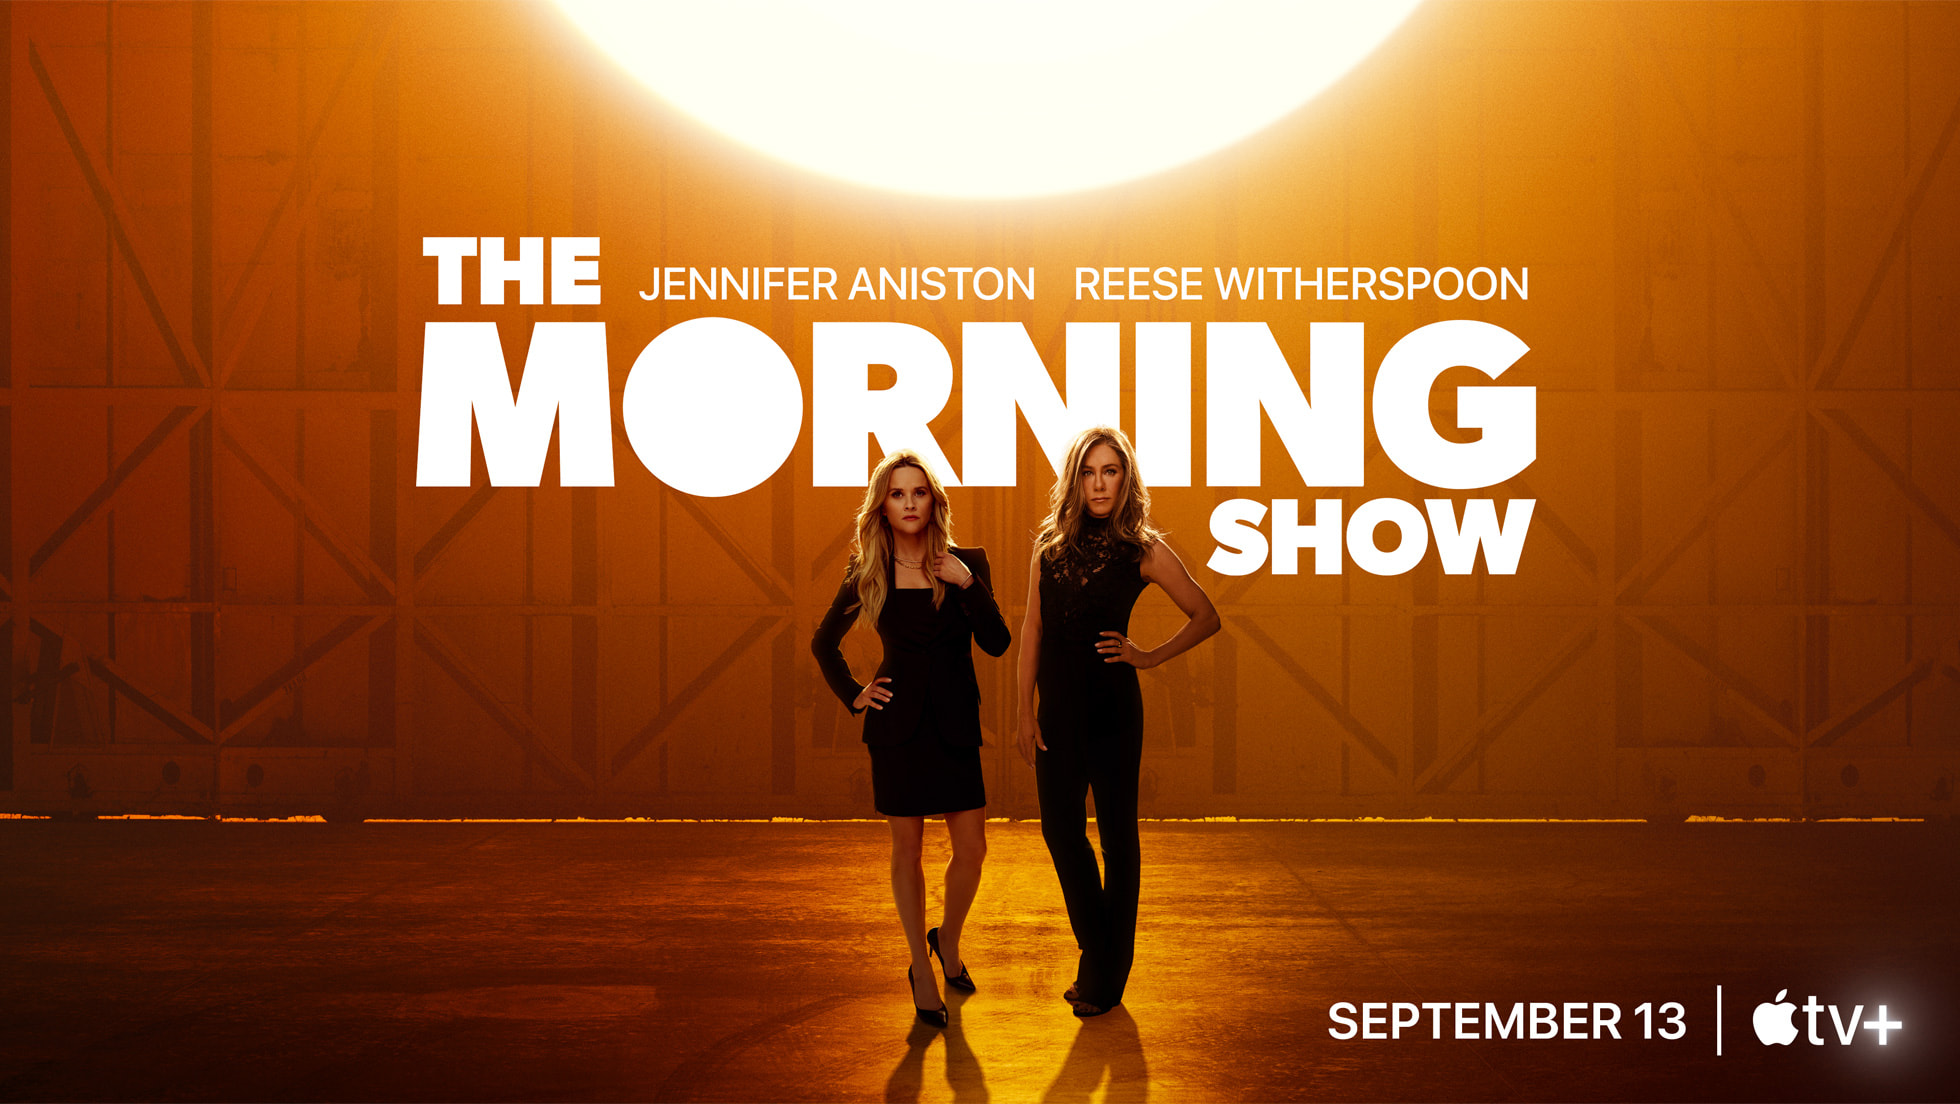 Season 3 of Apple TV+'s Emmy Award-winning global hit series “The Morning Show" - Out Sept. 13